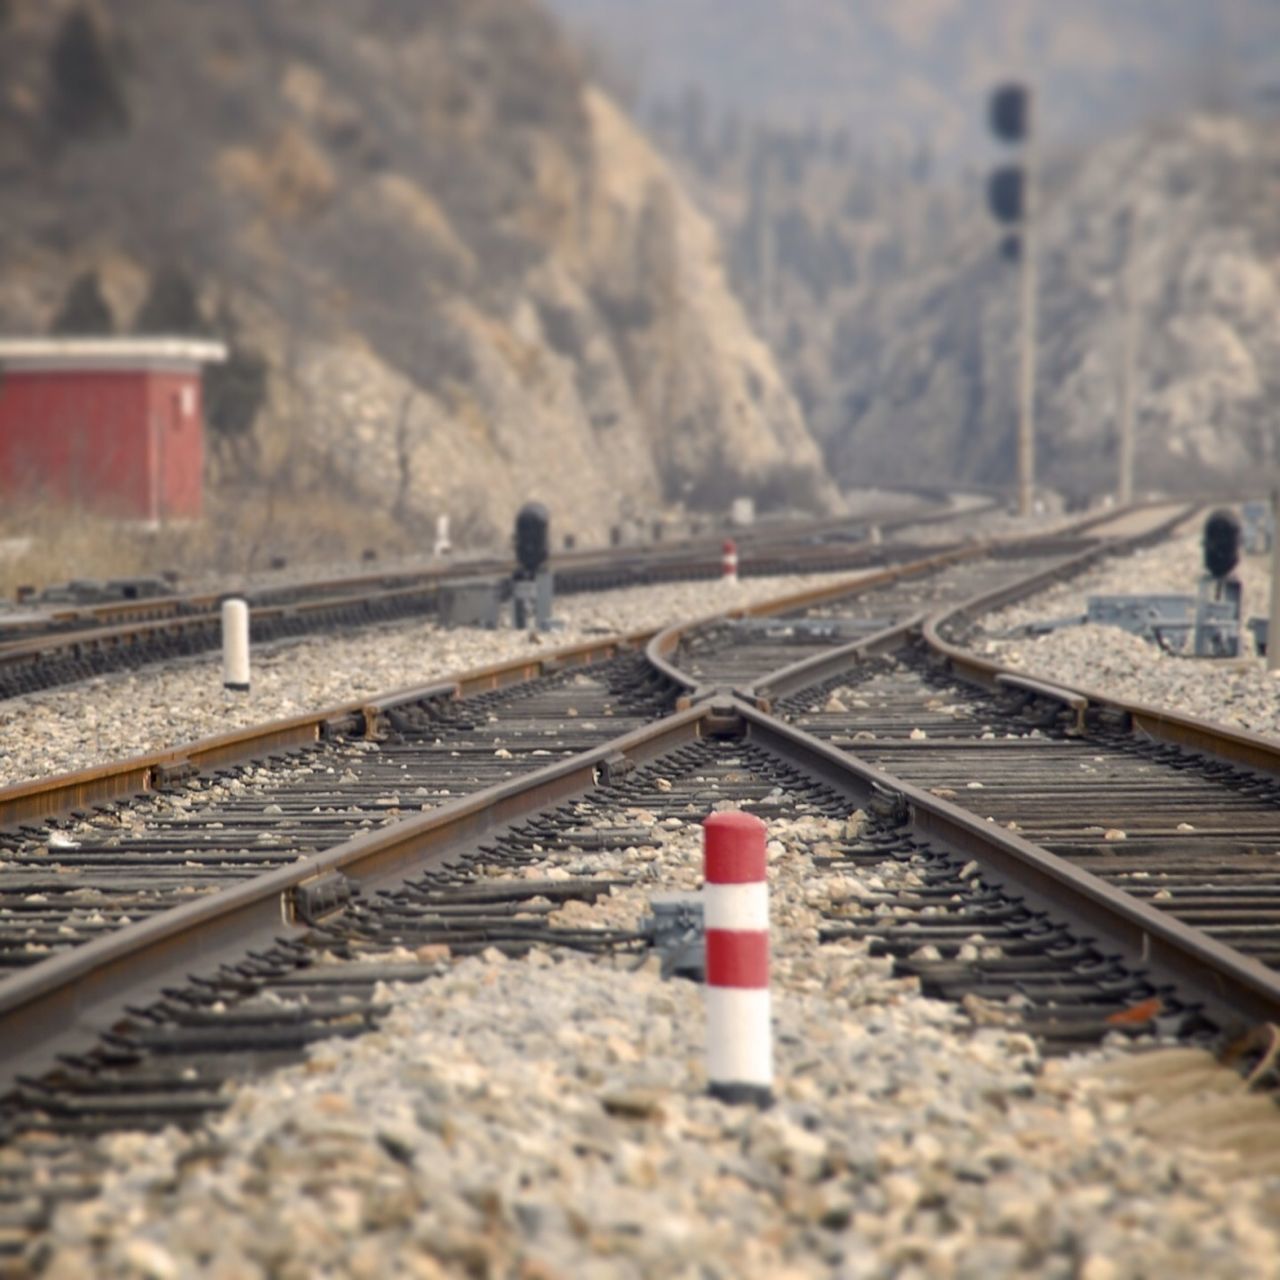 railroad track, rail transportation, transportation, public transportation, railroad station platform, train - vehicle, railroad station, sky, travel, railway track, day, metal, selective focus, diminishing perspective, outdoors, focus on foreground, no people, the way forward, red, train